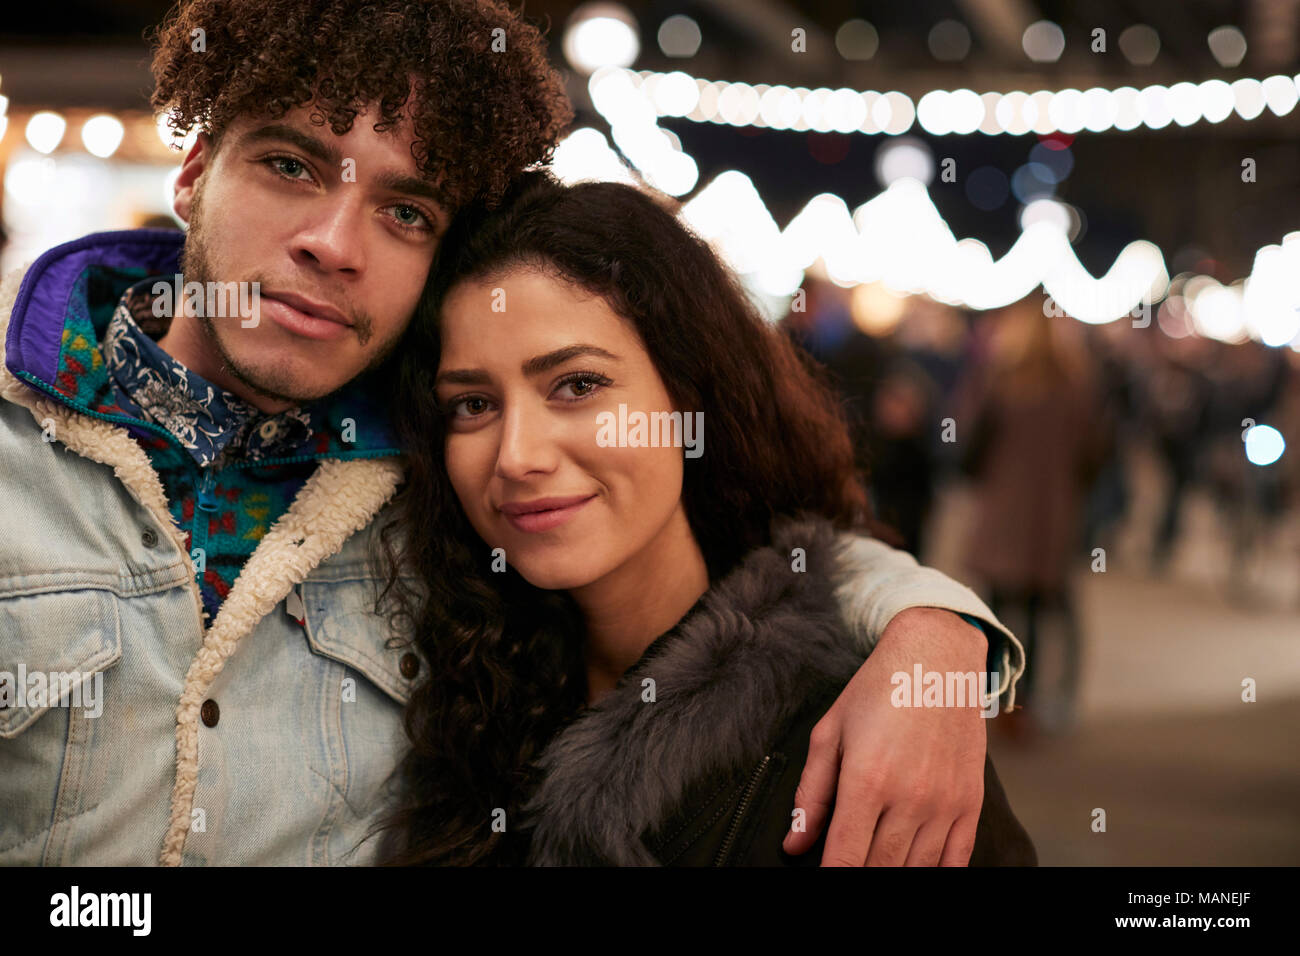 Portrait Of Young Friends Enjoying Christmas Market At Night Stock Photo